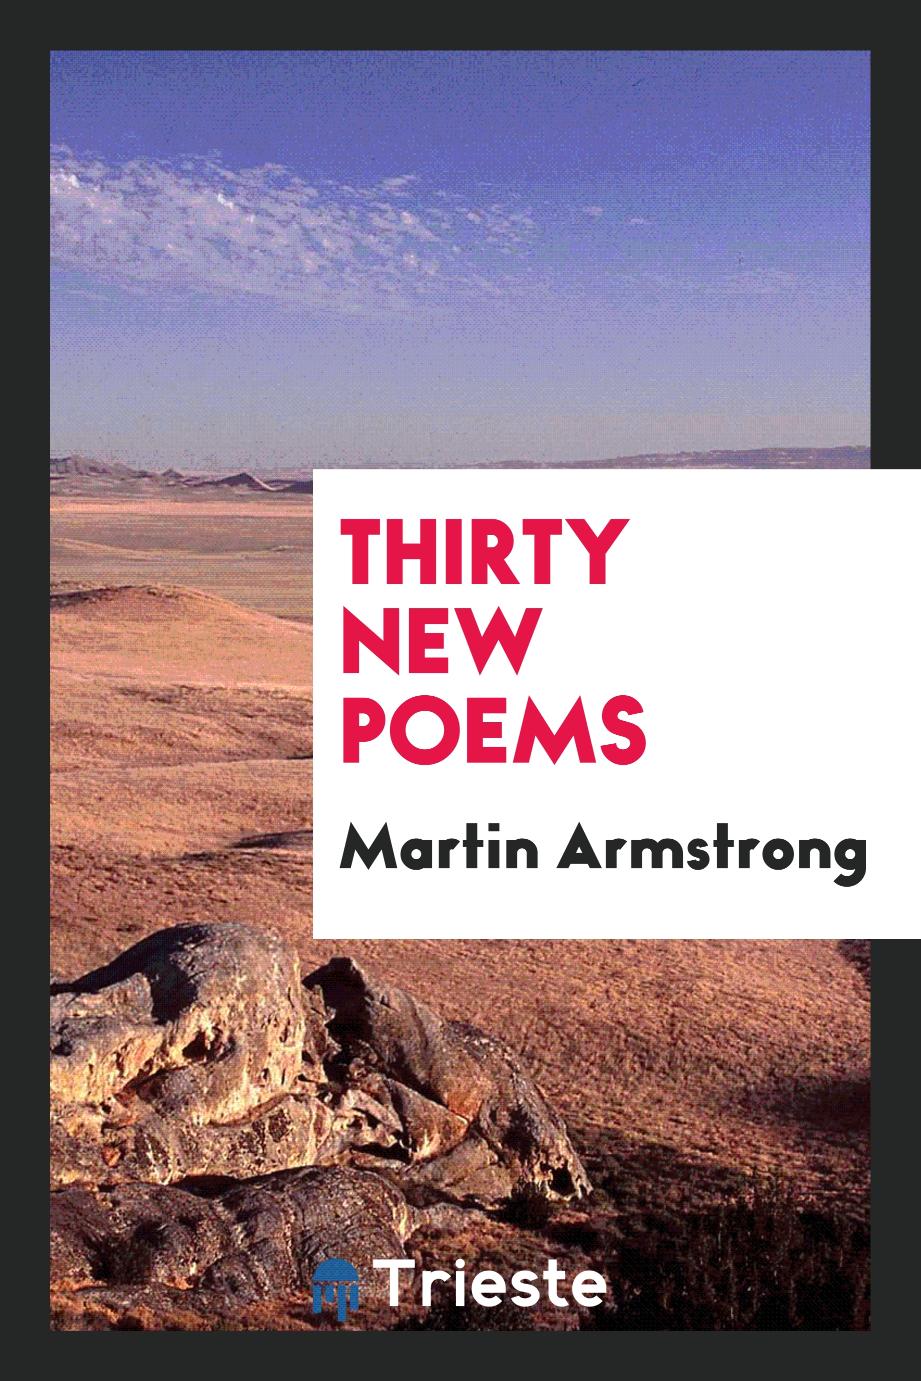 Thirty new poems